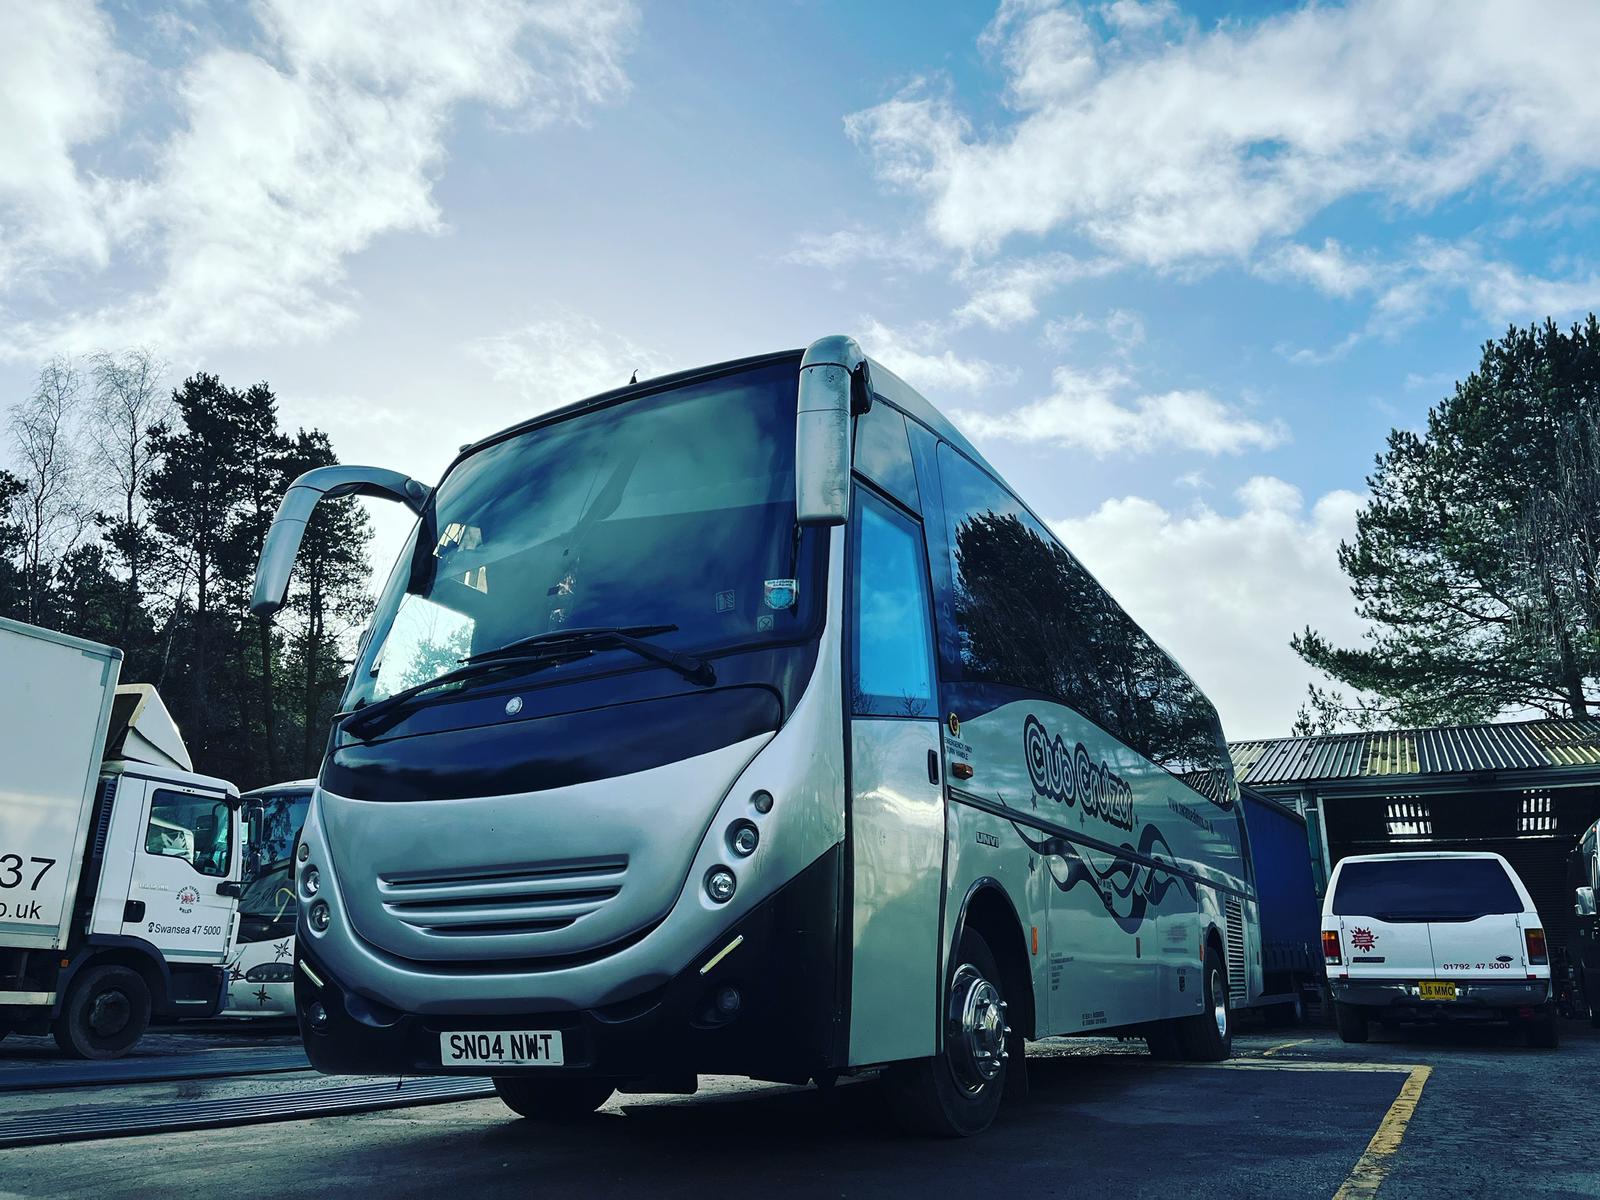 Party Bus Hire from RCT (Rhondda) to Cardiff